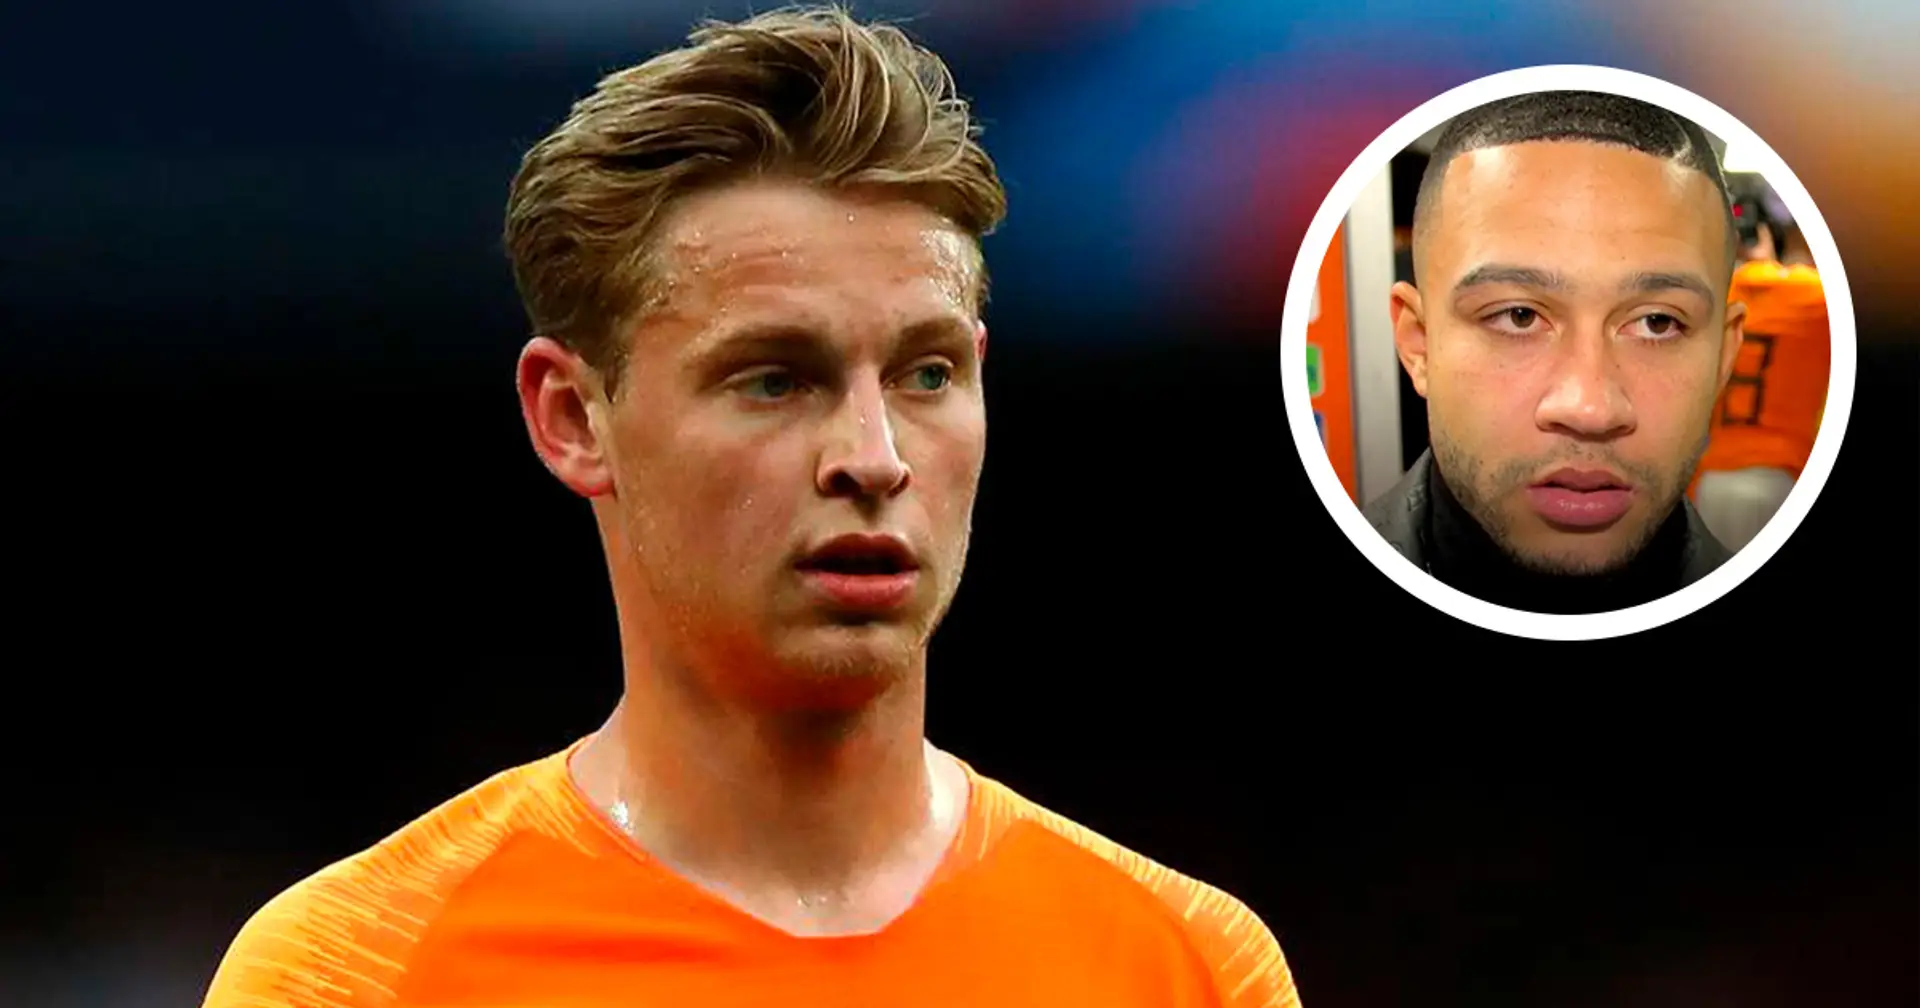 'The engine of our game': Depay talks De Jong's impact on the Netherlands' play